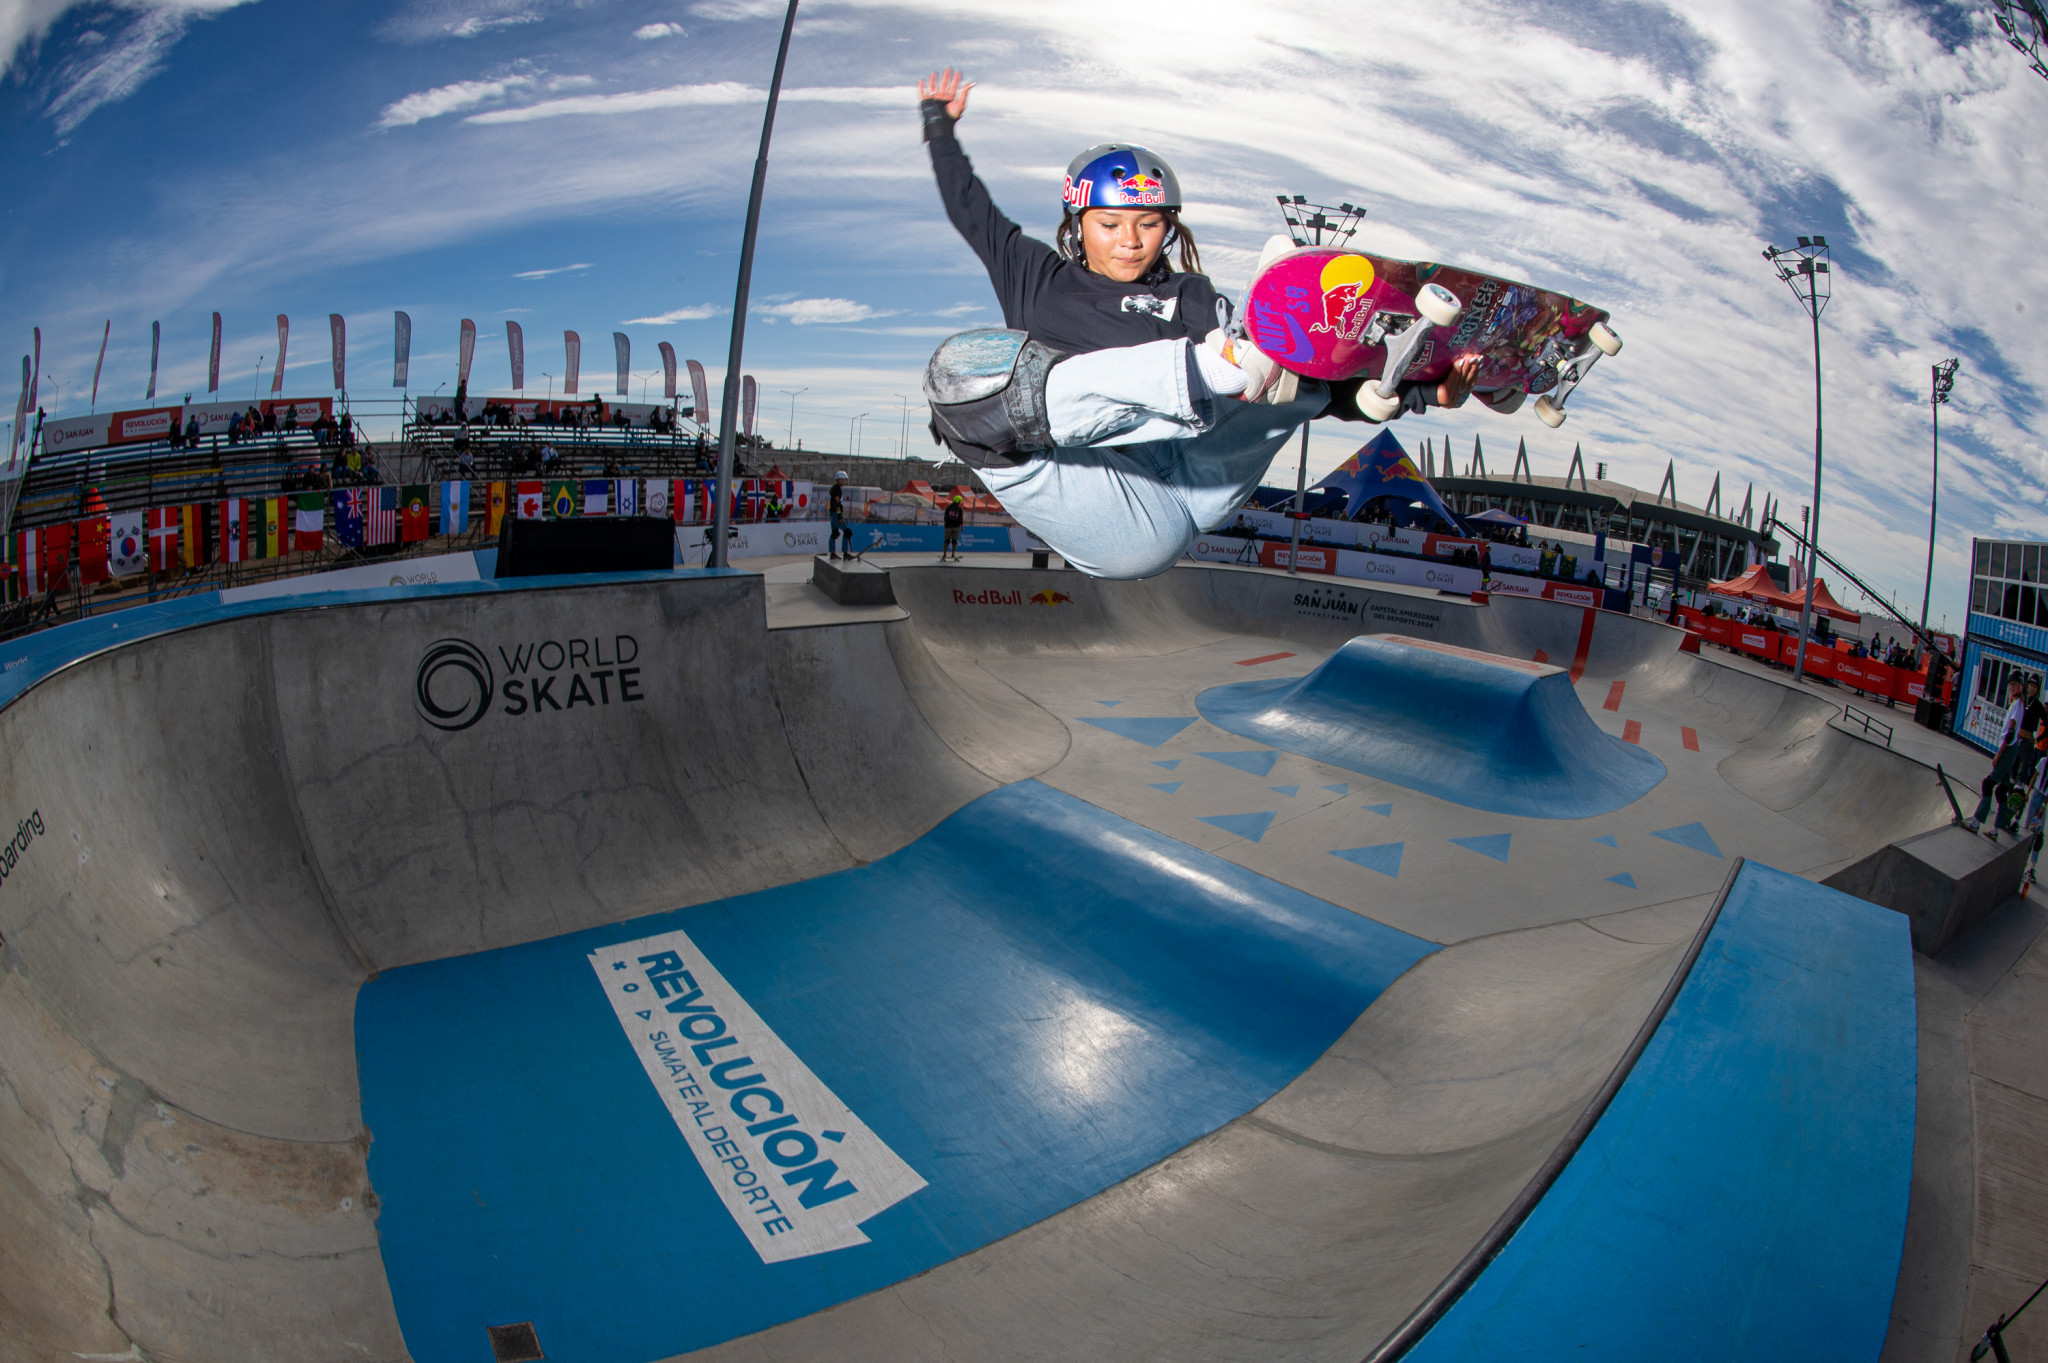 Britain's 14-year-old Sky Brown was in superb form again as she won the opening World Skateboarding Pro Tour event in San Juan ©Skateboard GB